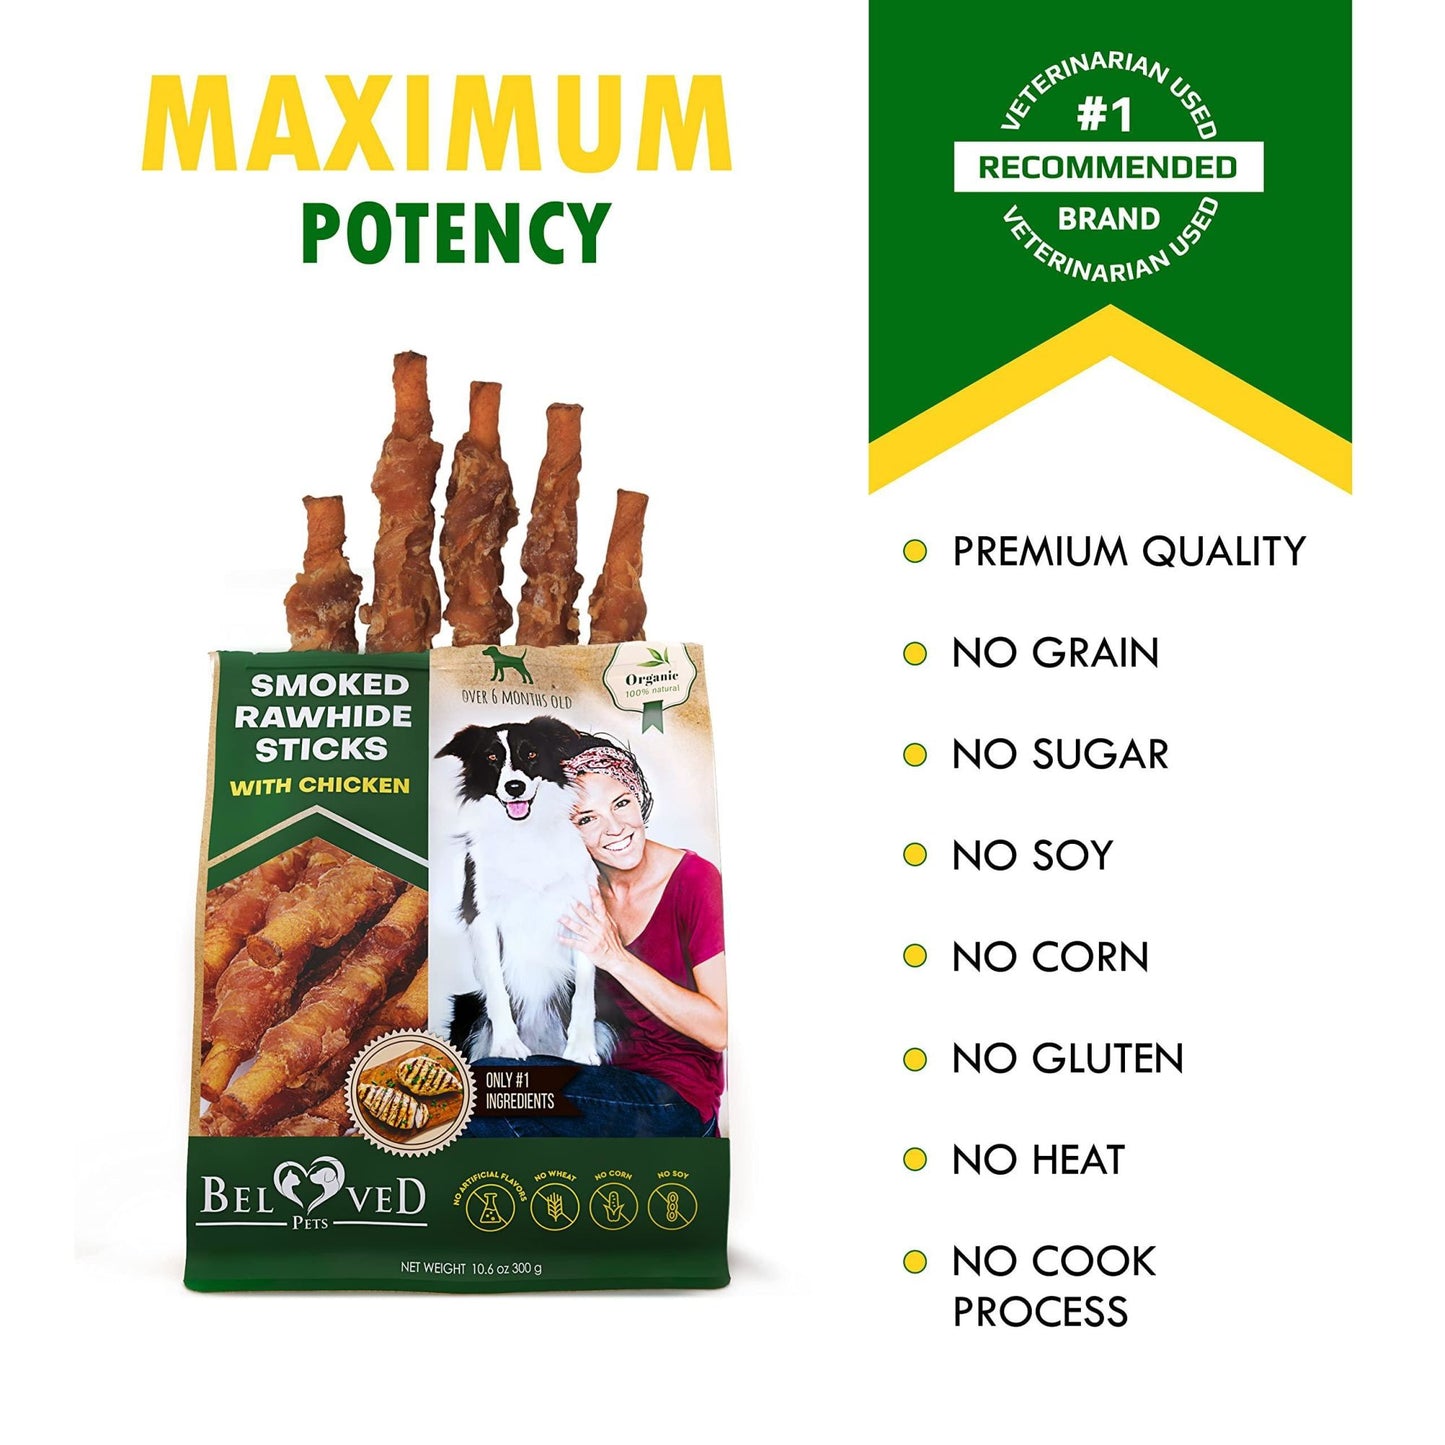 Dog Smoked Rawhide Sticks Wrapped Chicken Pet Natural Chew Treats Grain Free Organic Meat Healthy Human Grade Dried Snacks in Bulk